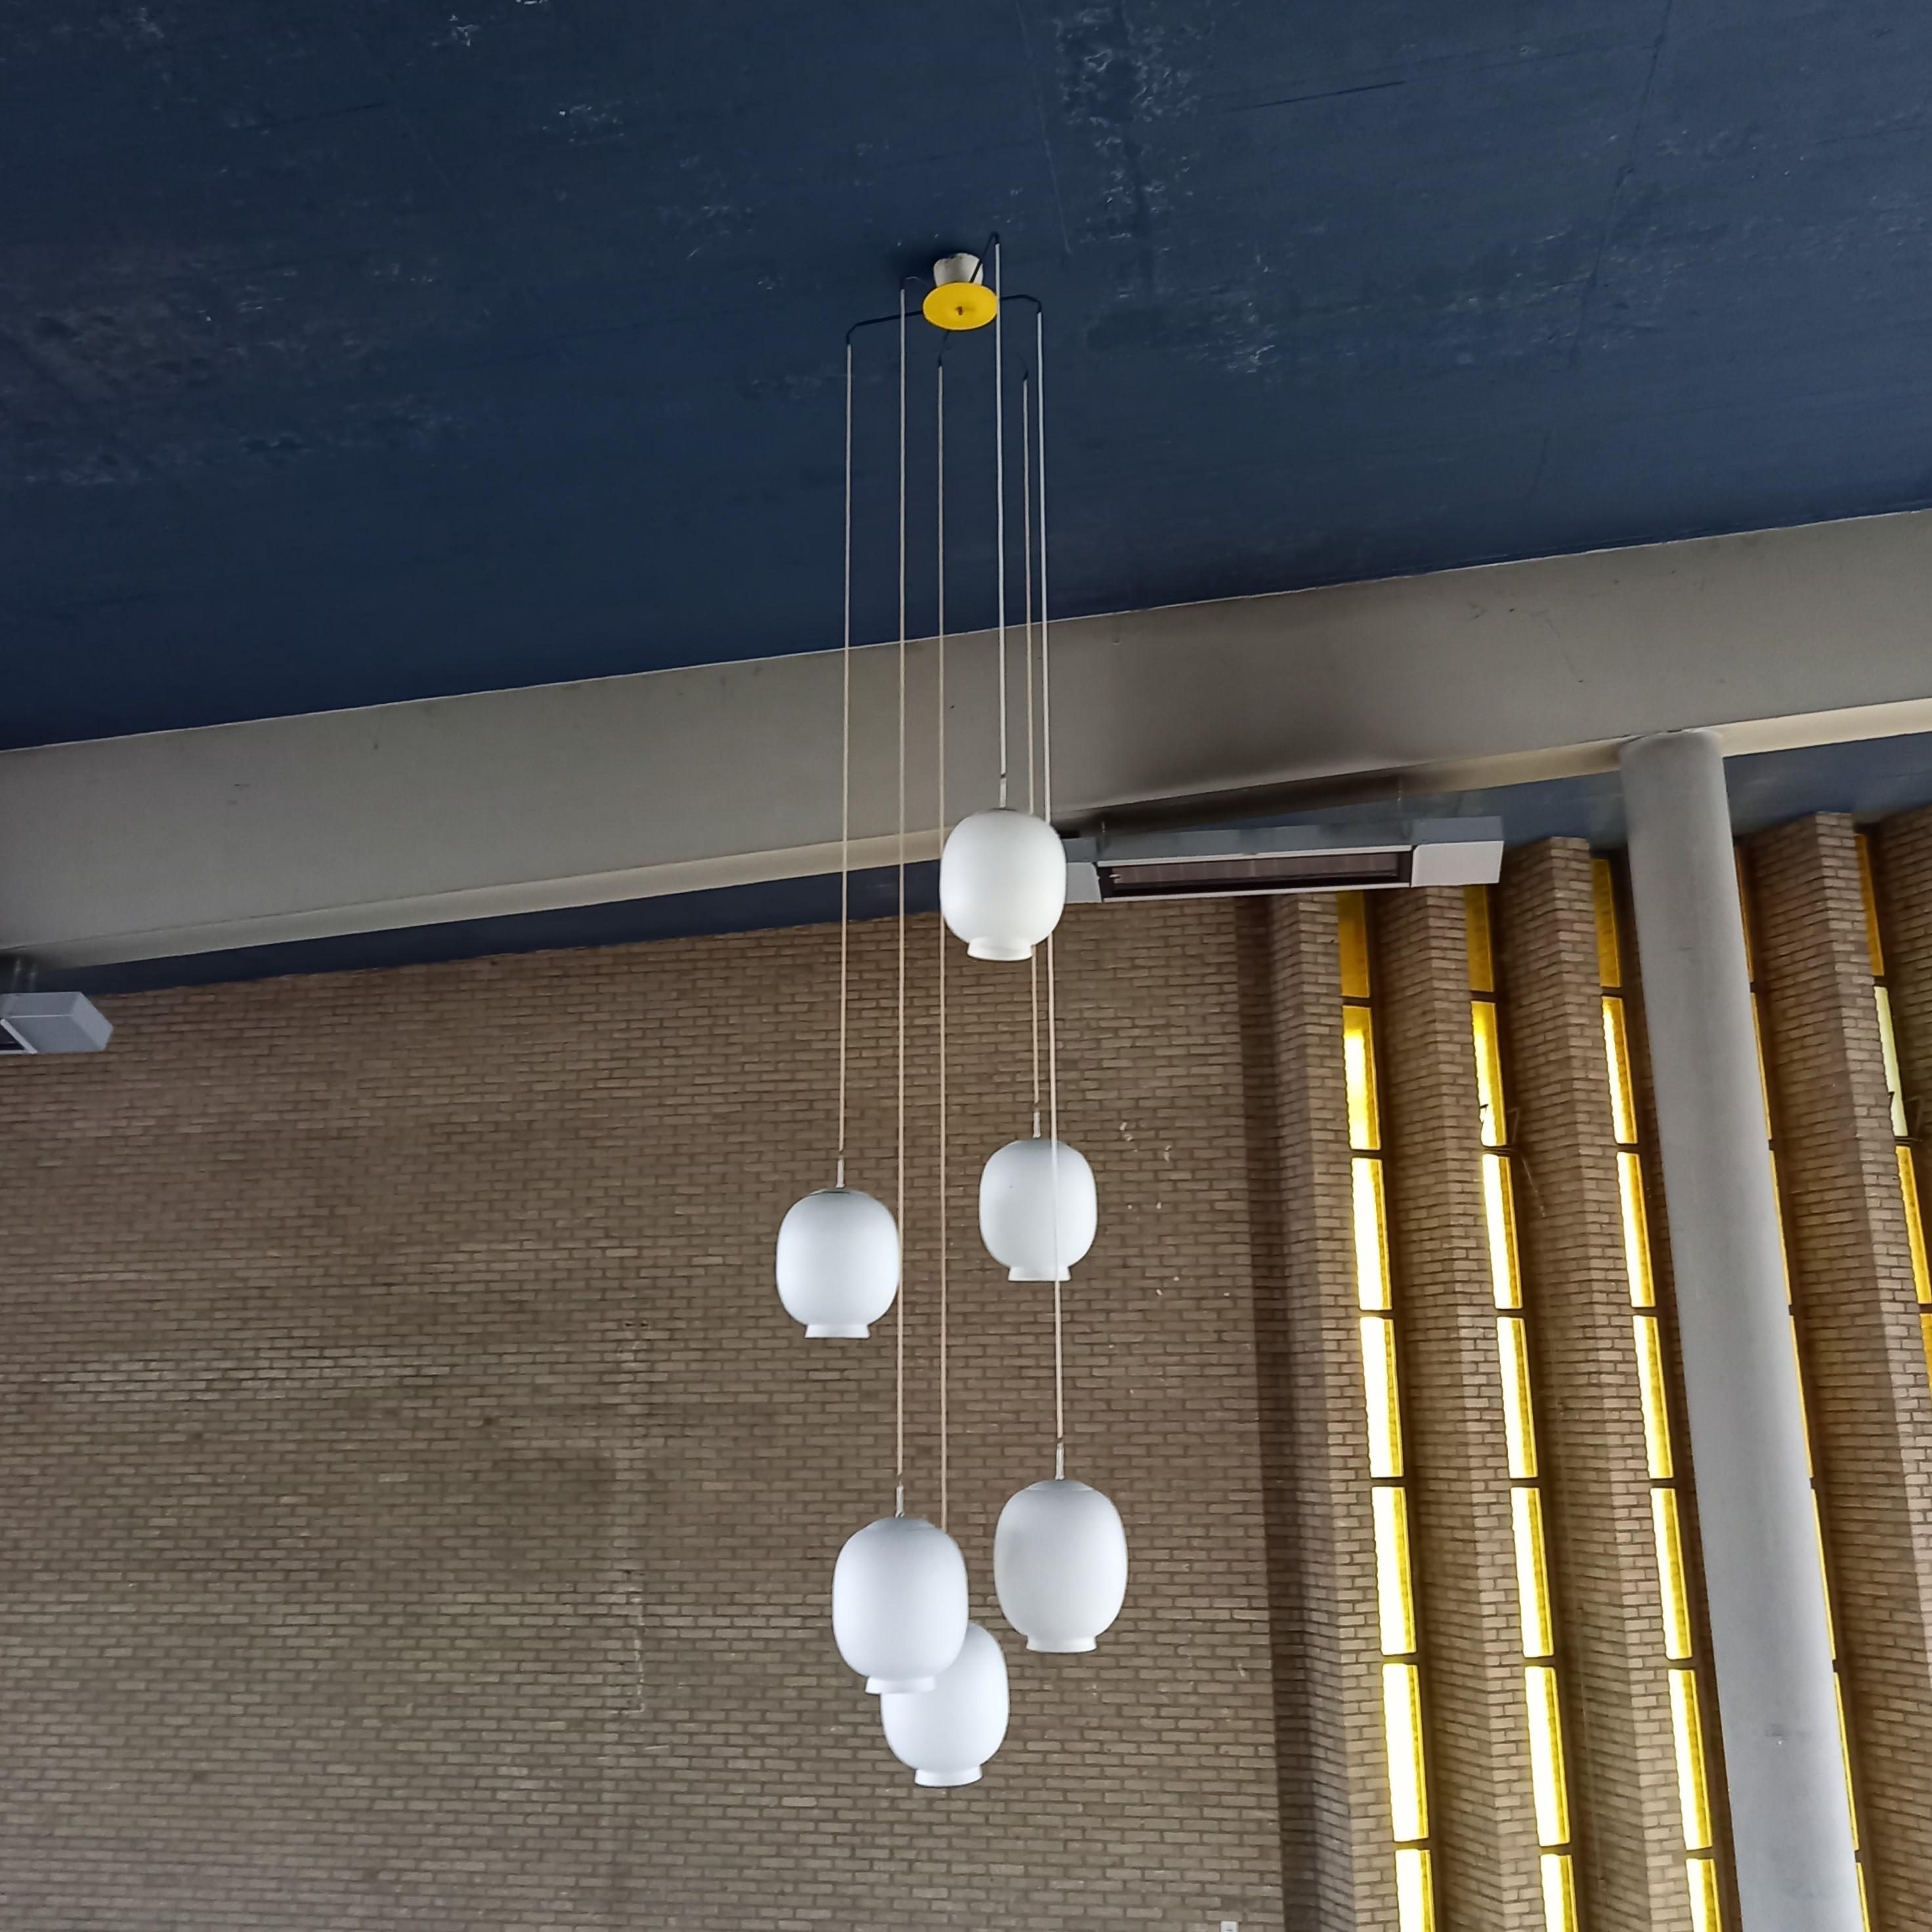 Lacquered 4 Vintage Chandeliers by Philips from a Modernist Church, Netherlands, 1960's For Sale